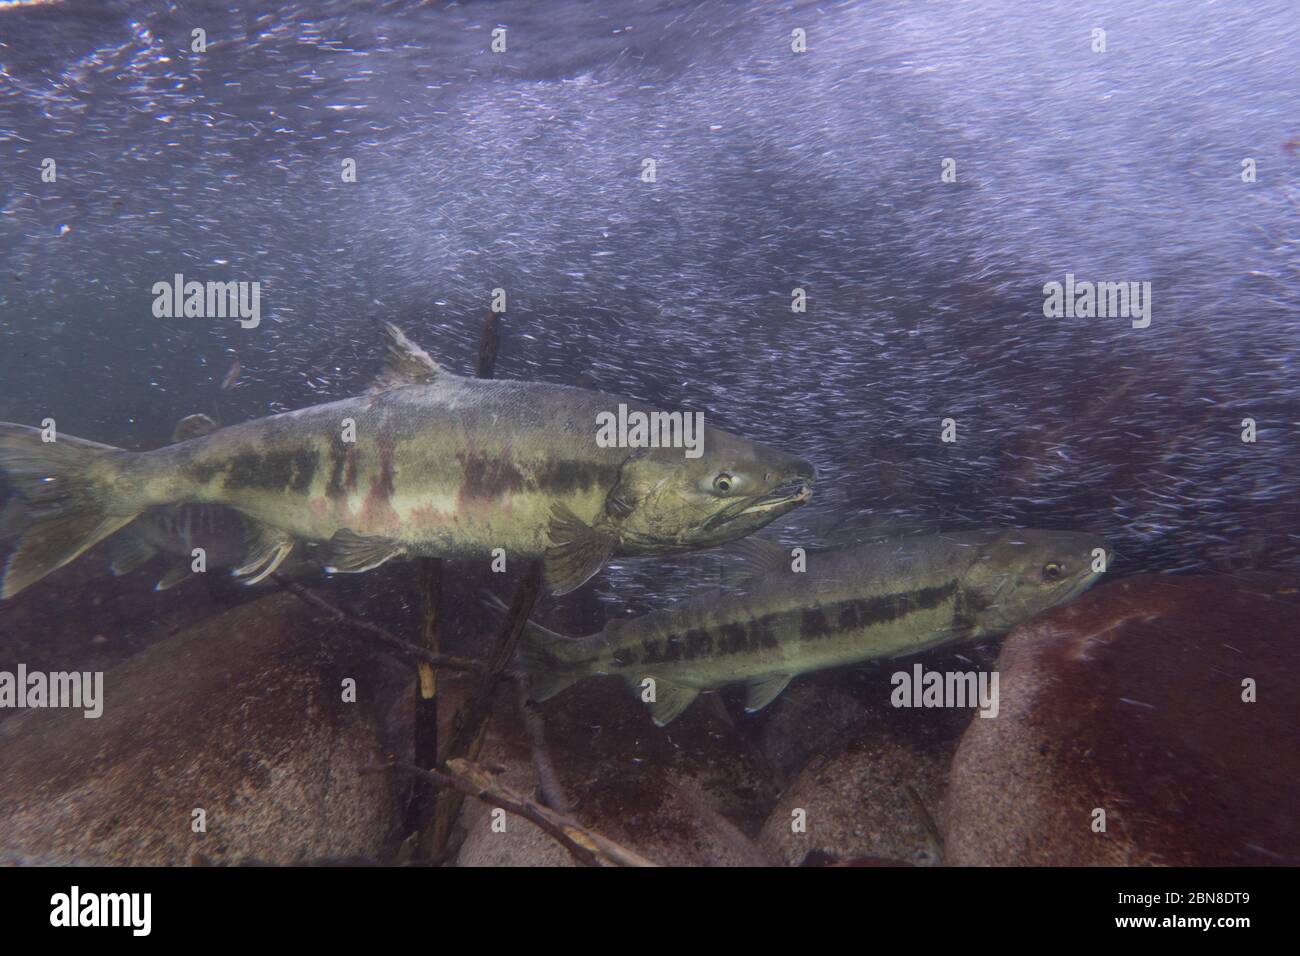 Male and female Chum salmon displaying spawning colors Stock Photo - Alamy